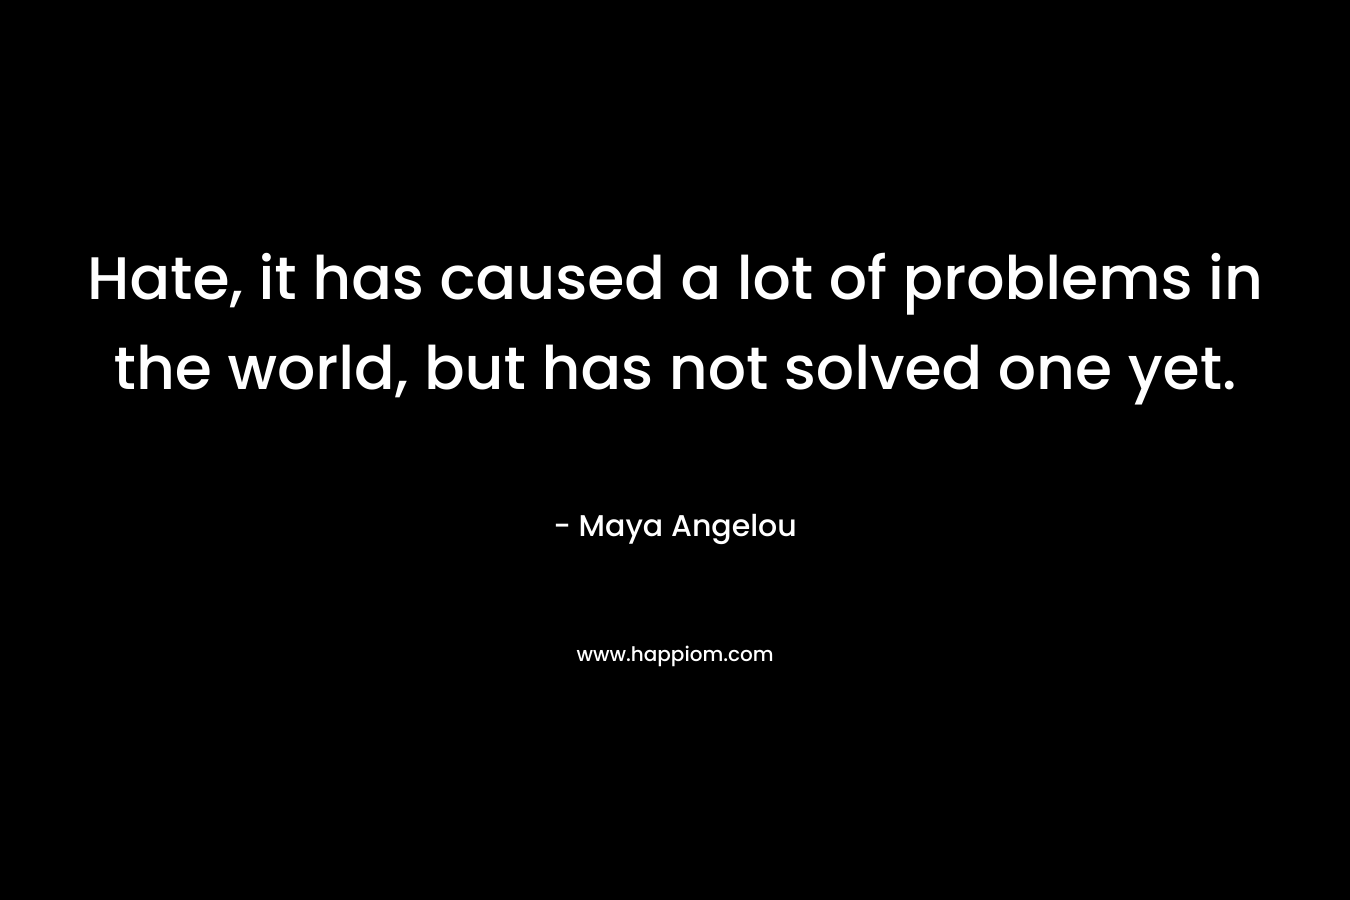 Hate, it has caused a lot of problems in the world, but has not solved one yet. – Maya Angelou